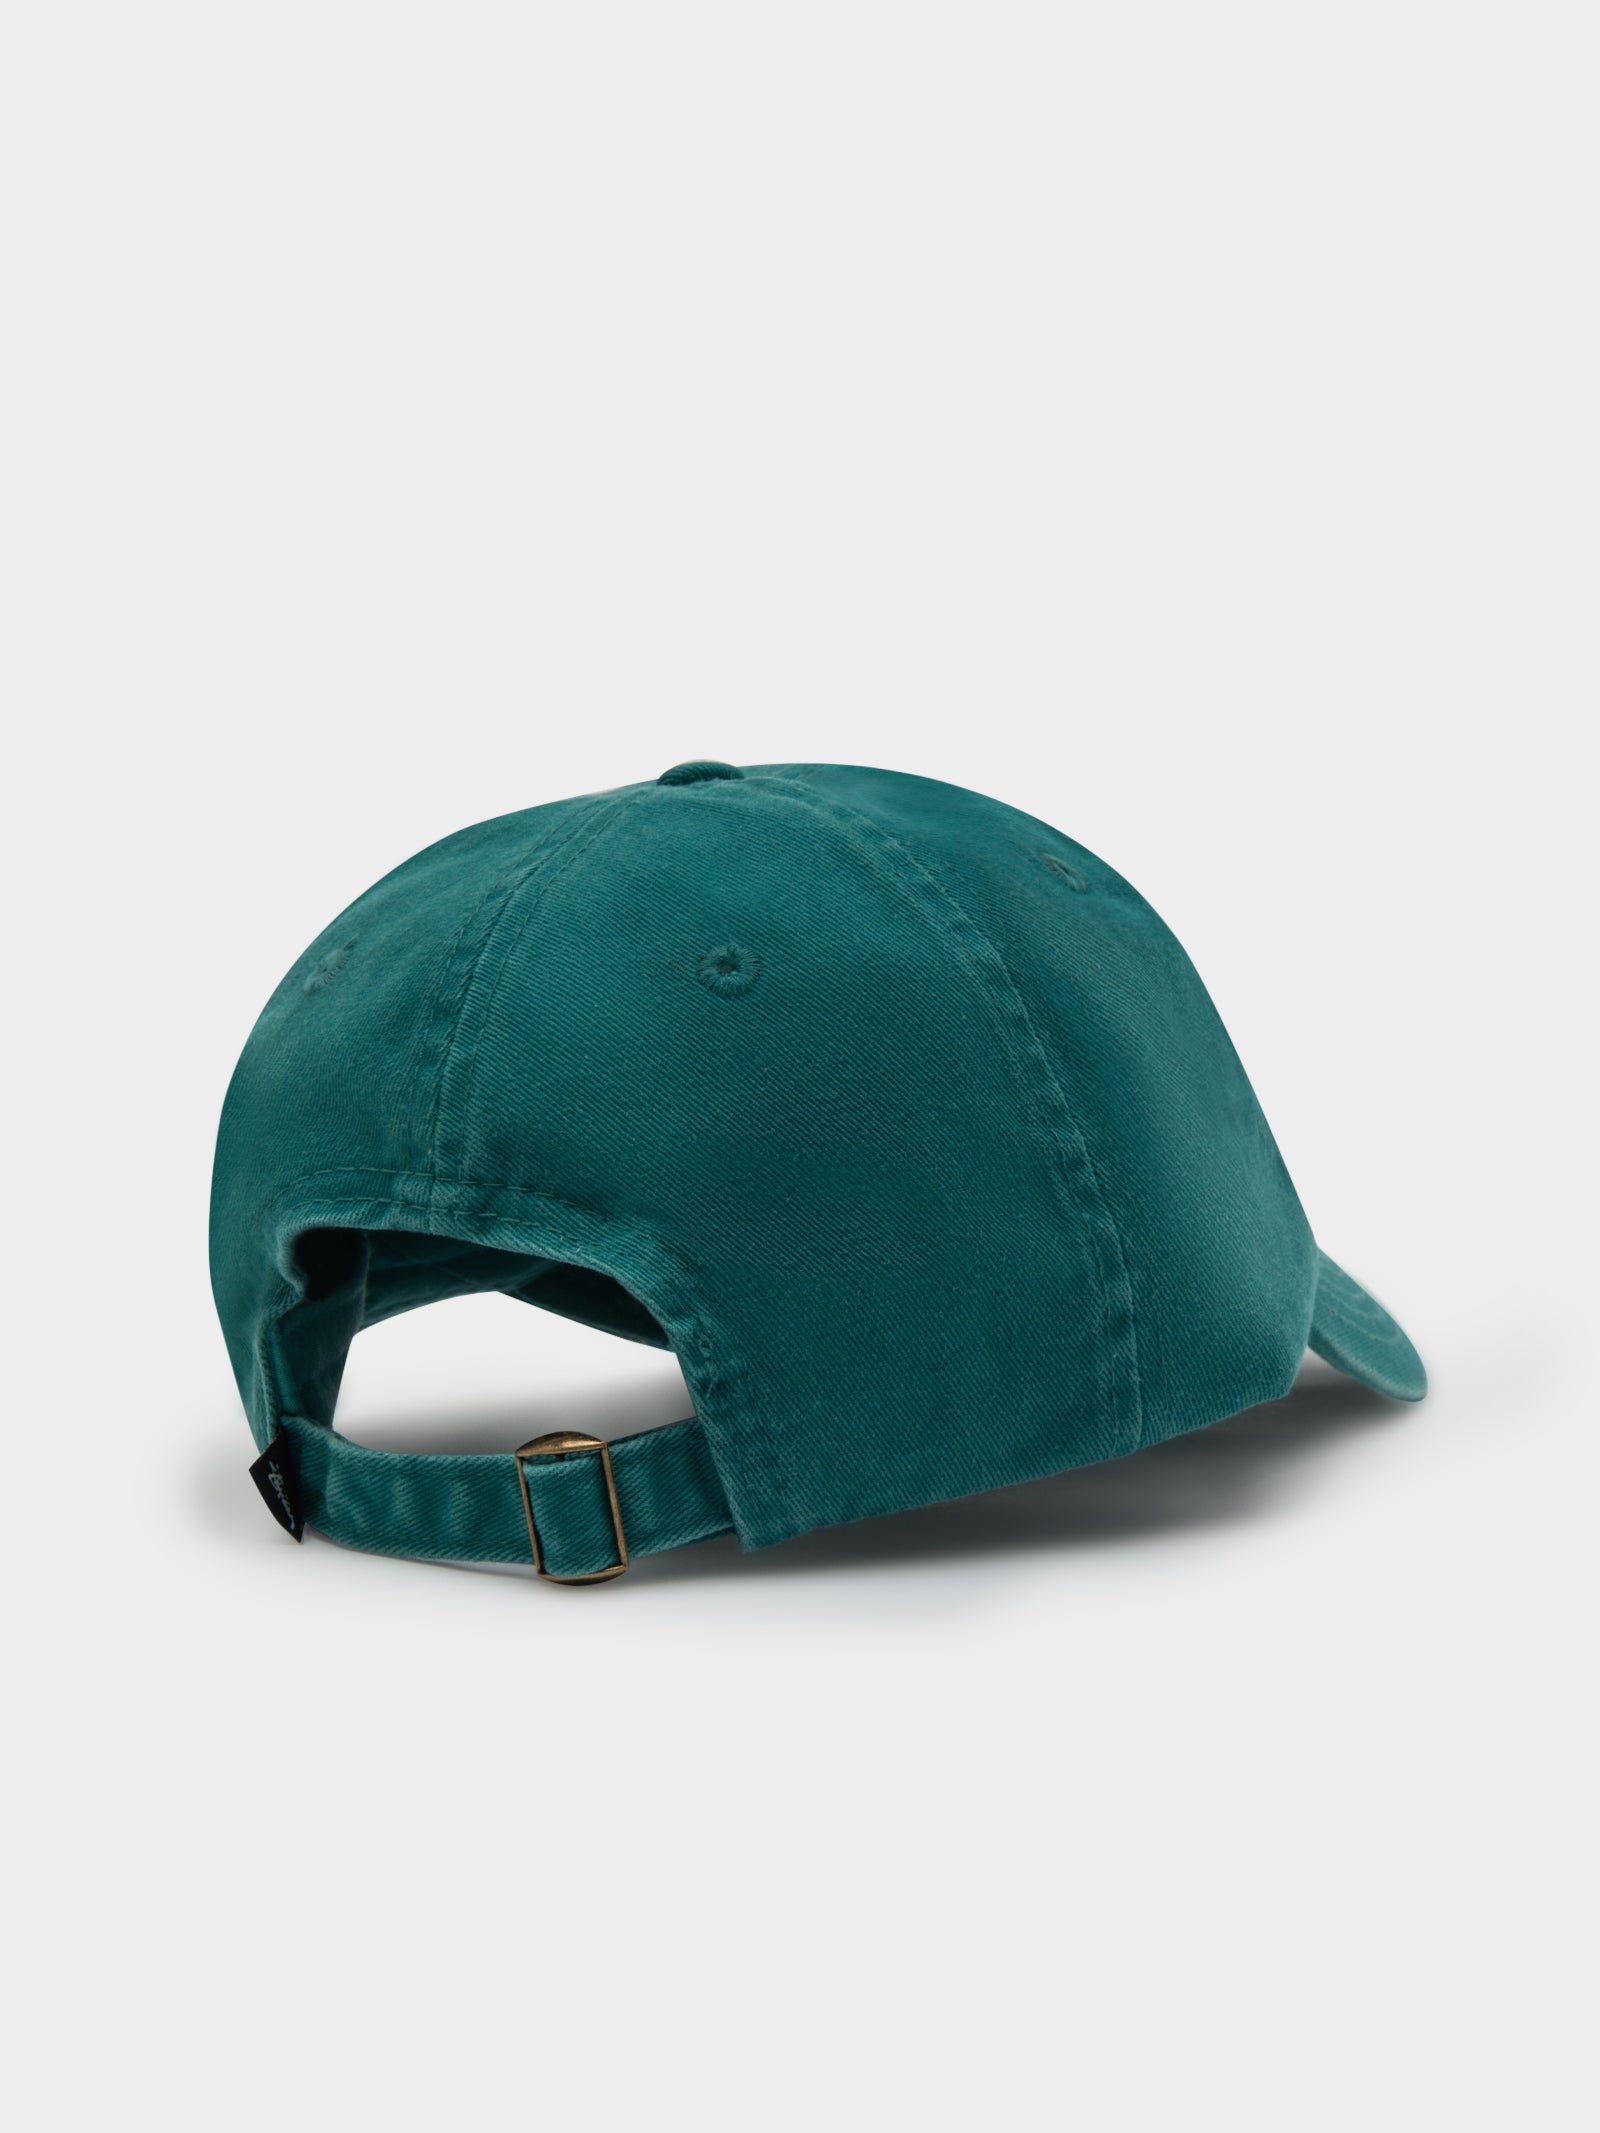 Stock Low Pro Cap in Teal - Glue Store